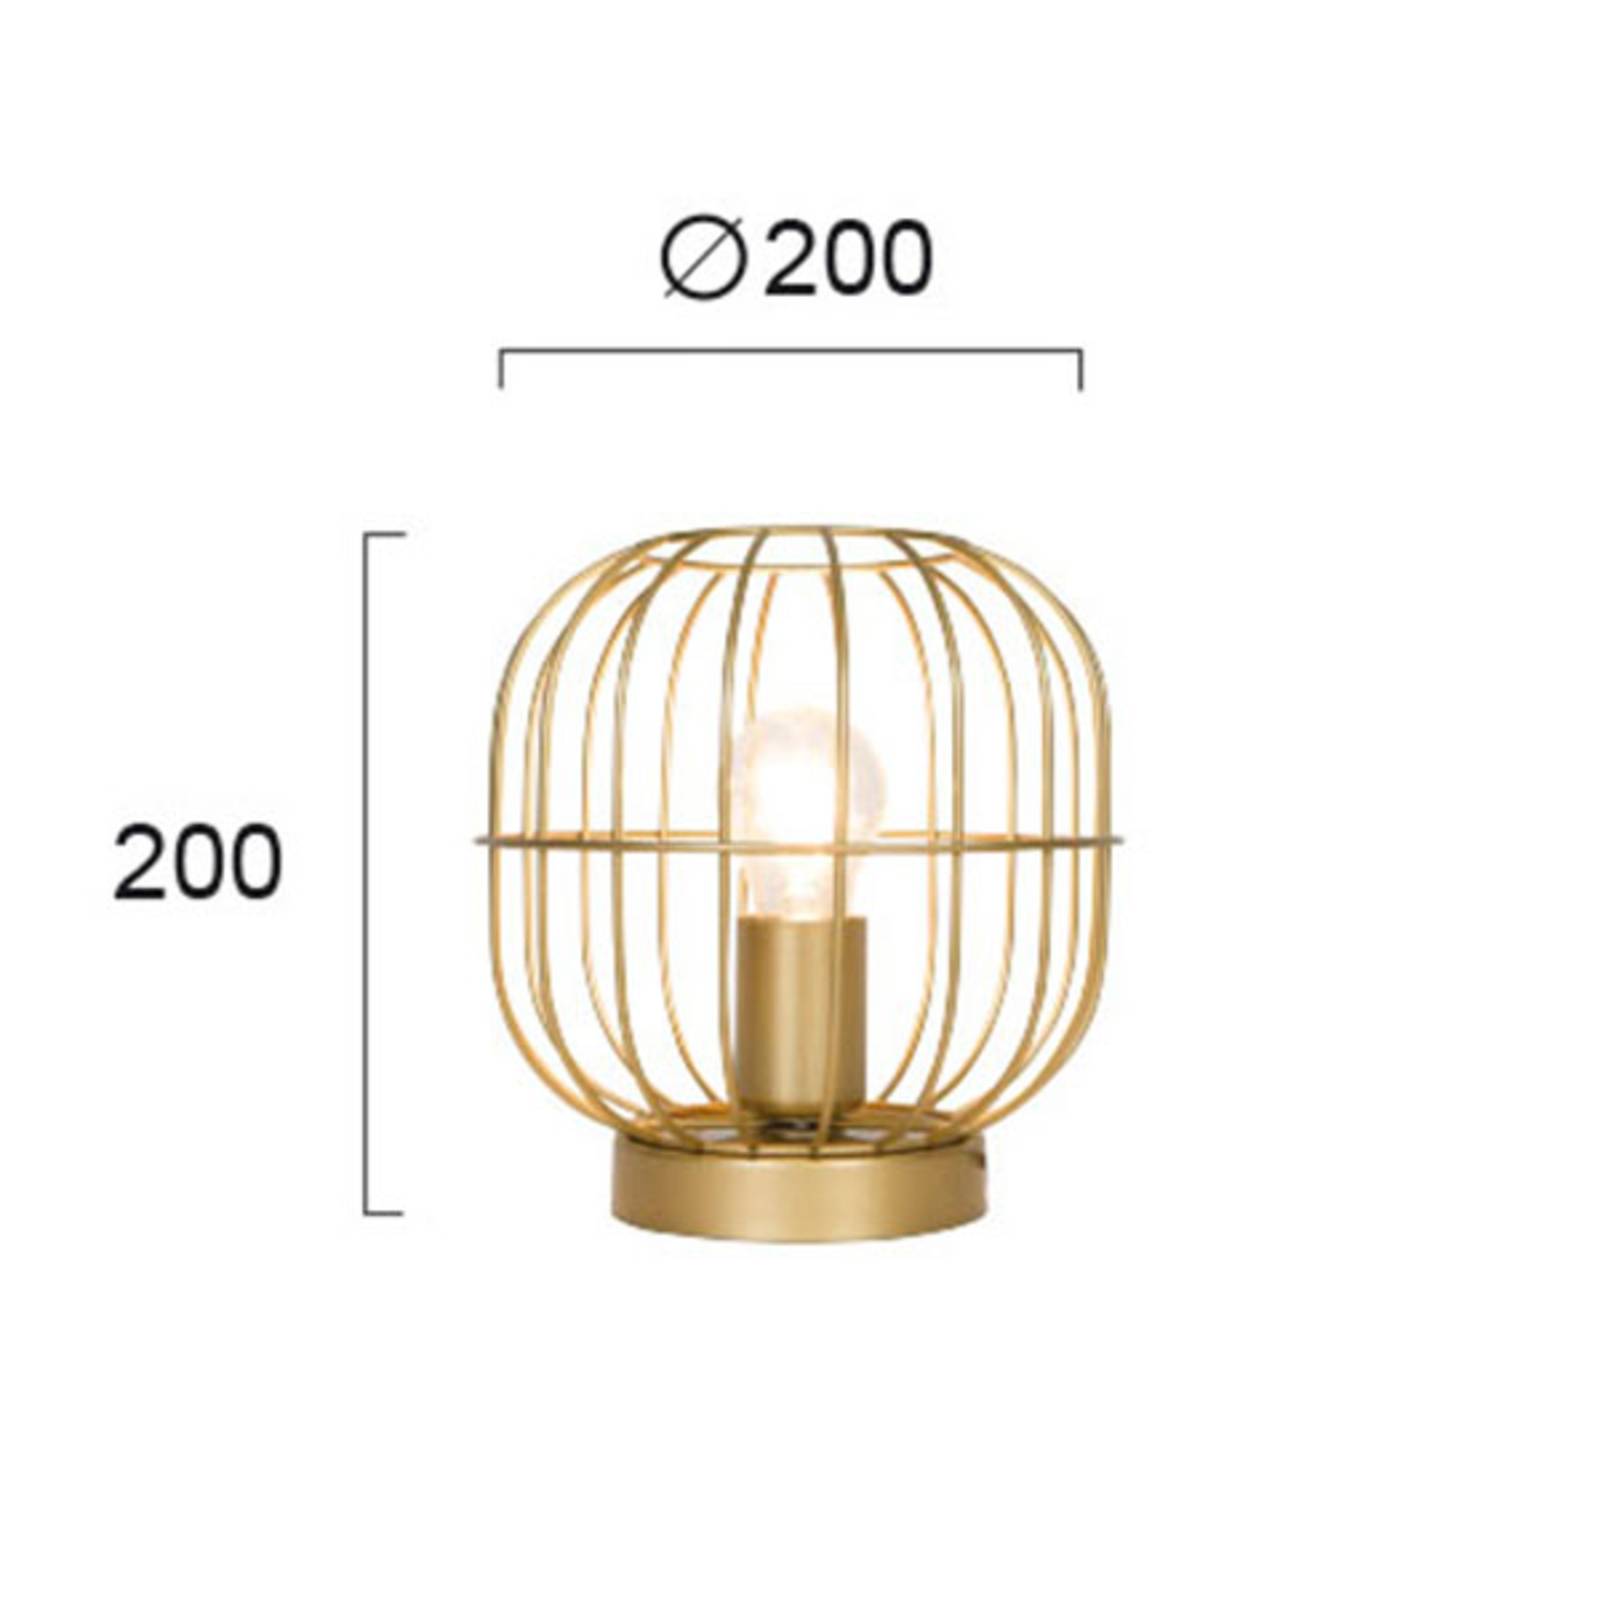 Zenith table lamp with a cage shape, gold